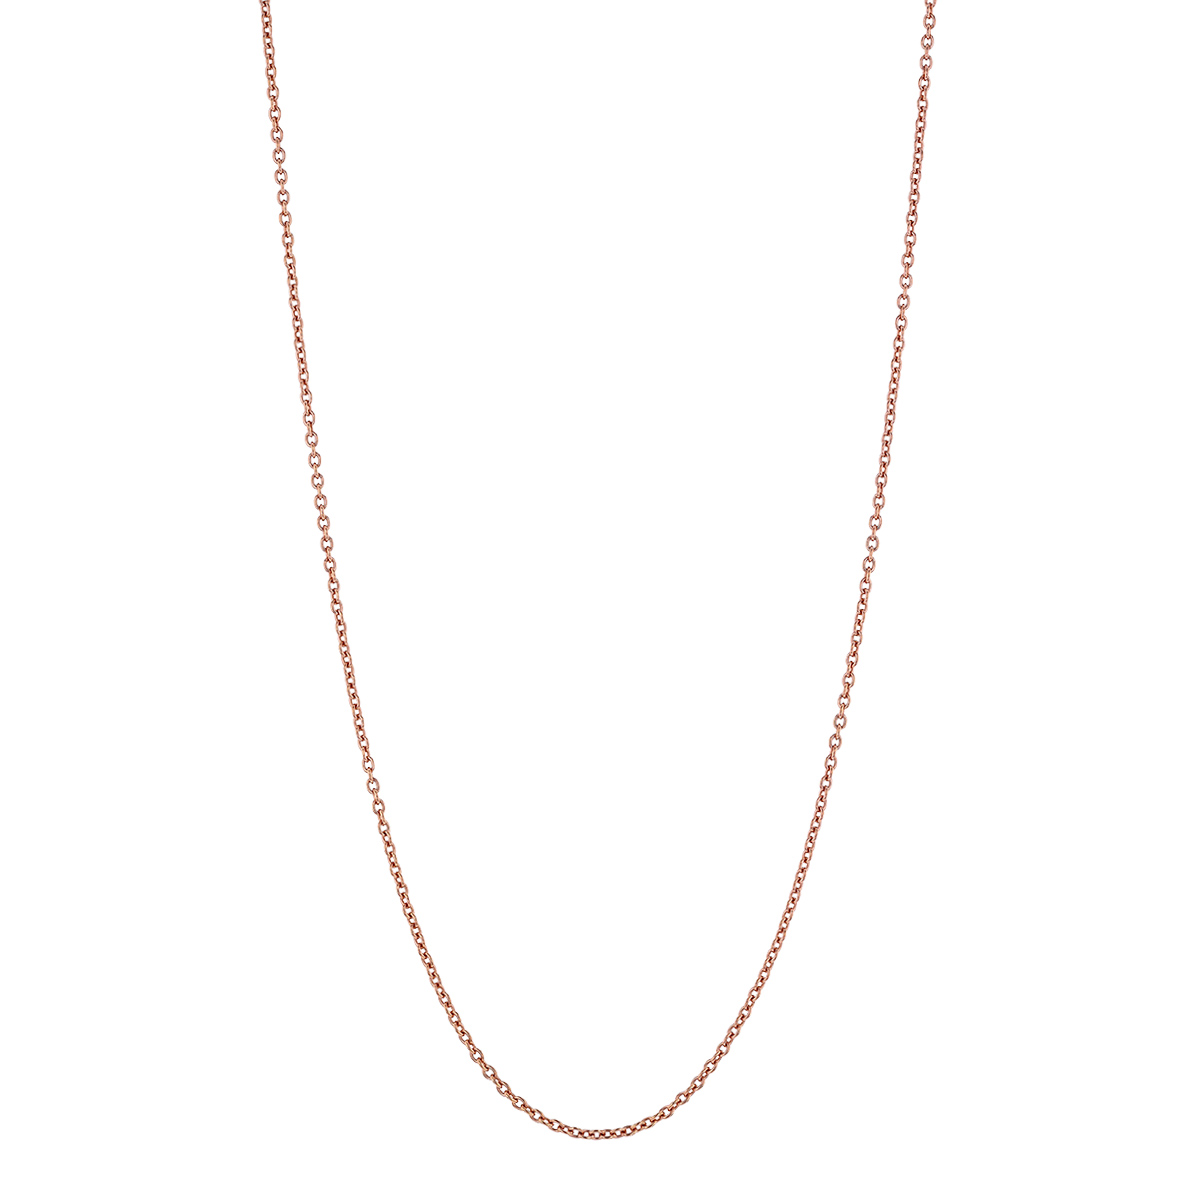 Roberto Coin Rose Gold Link Chain Necklace, 18